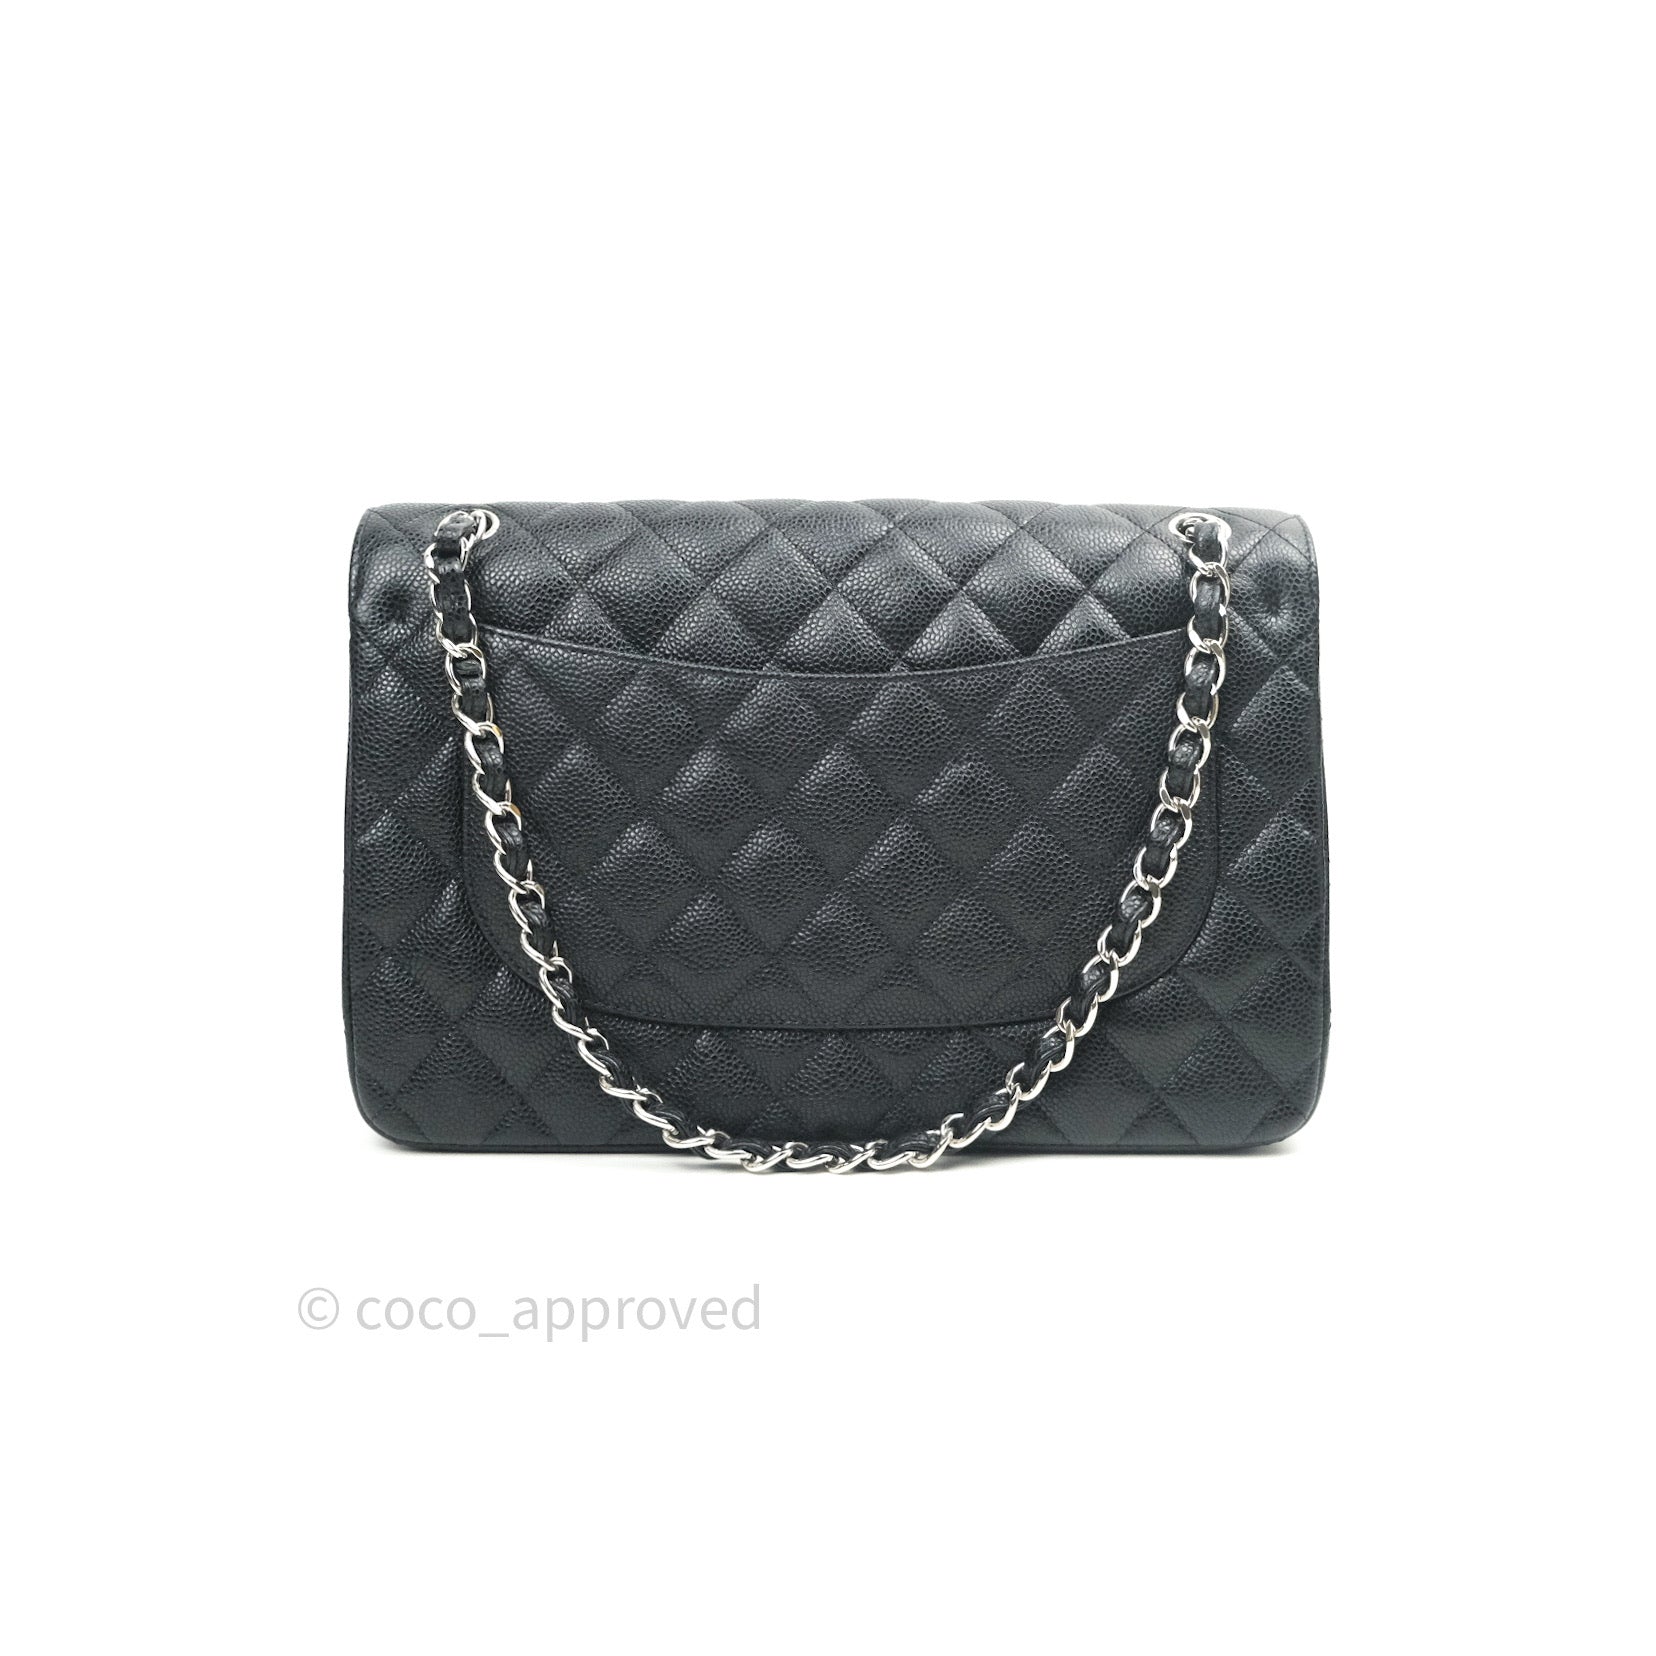 20% Non-refundable deposit to reserve: Chanel Classic Jumbo Double Flap  Black Quilted Caviar with gold hardware